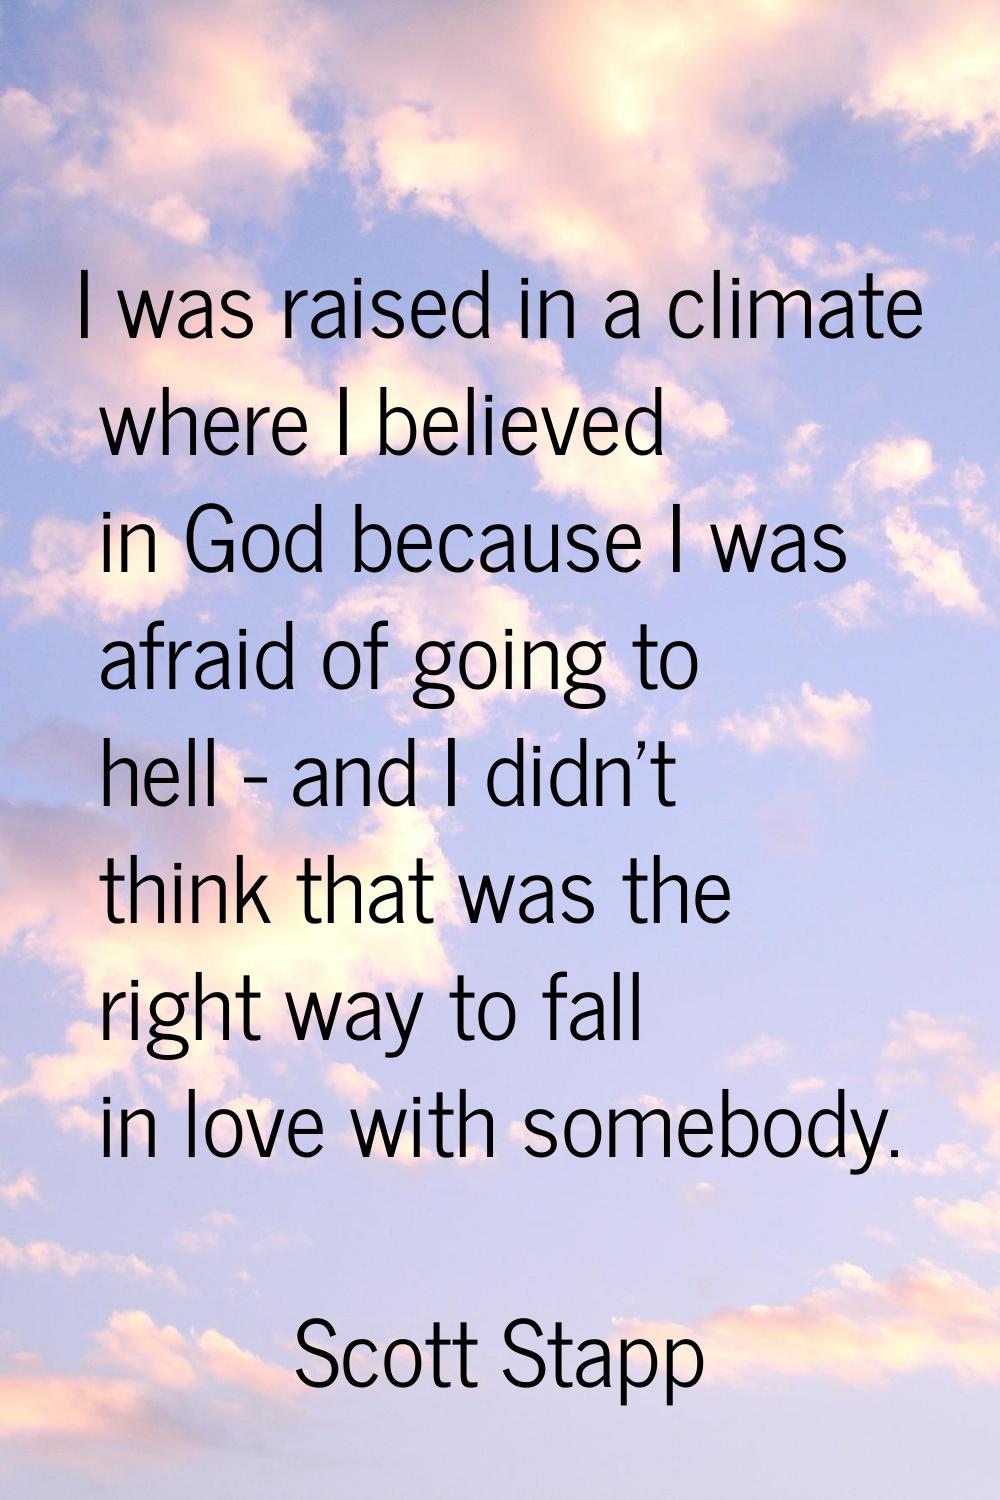 I was raised in a climate where I believed in God because I was afraid of going to hell - and I did